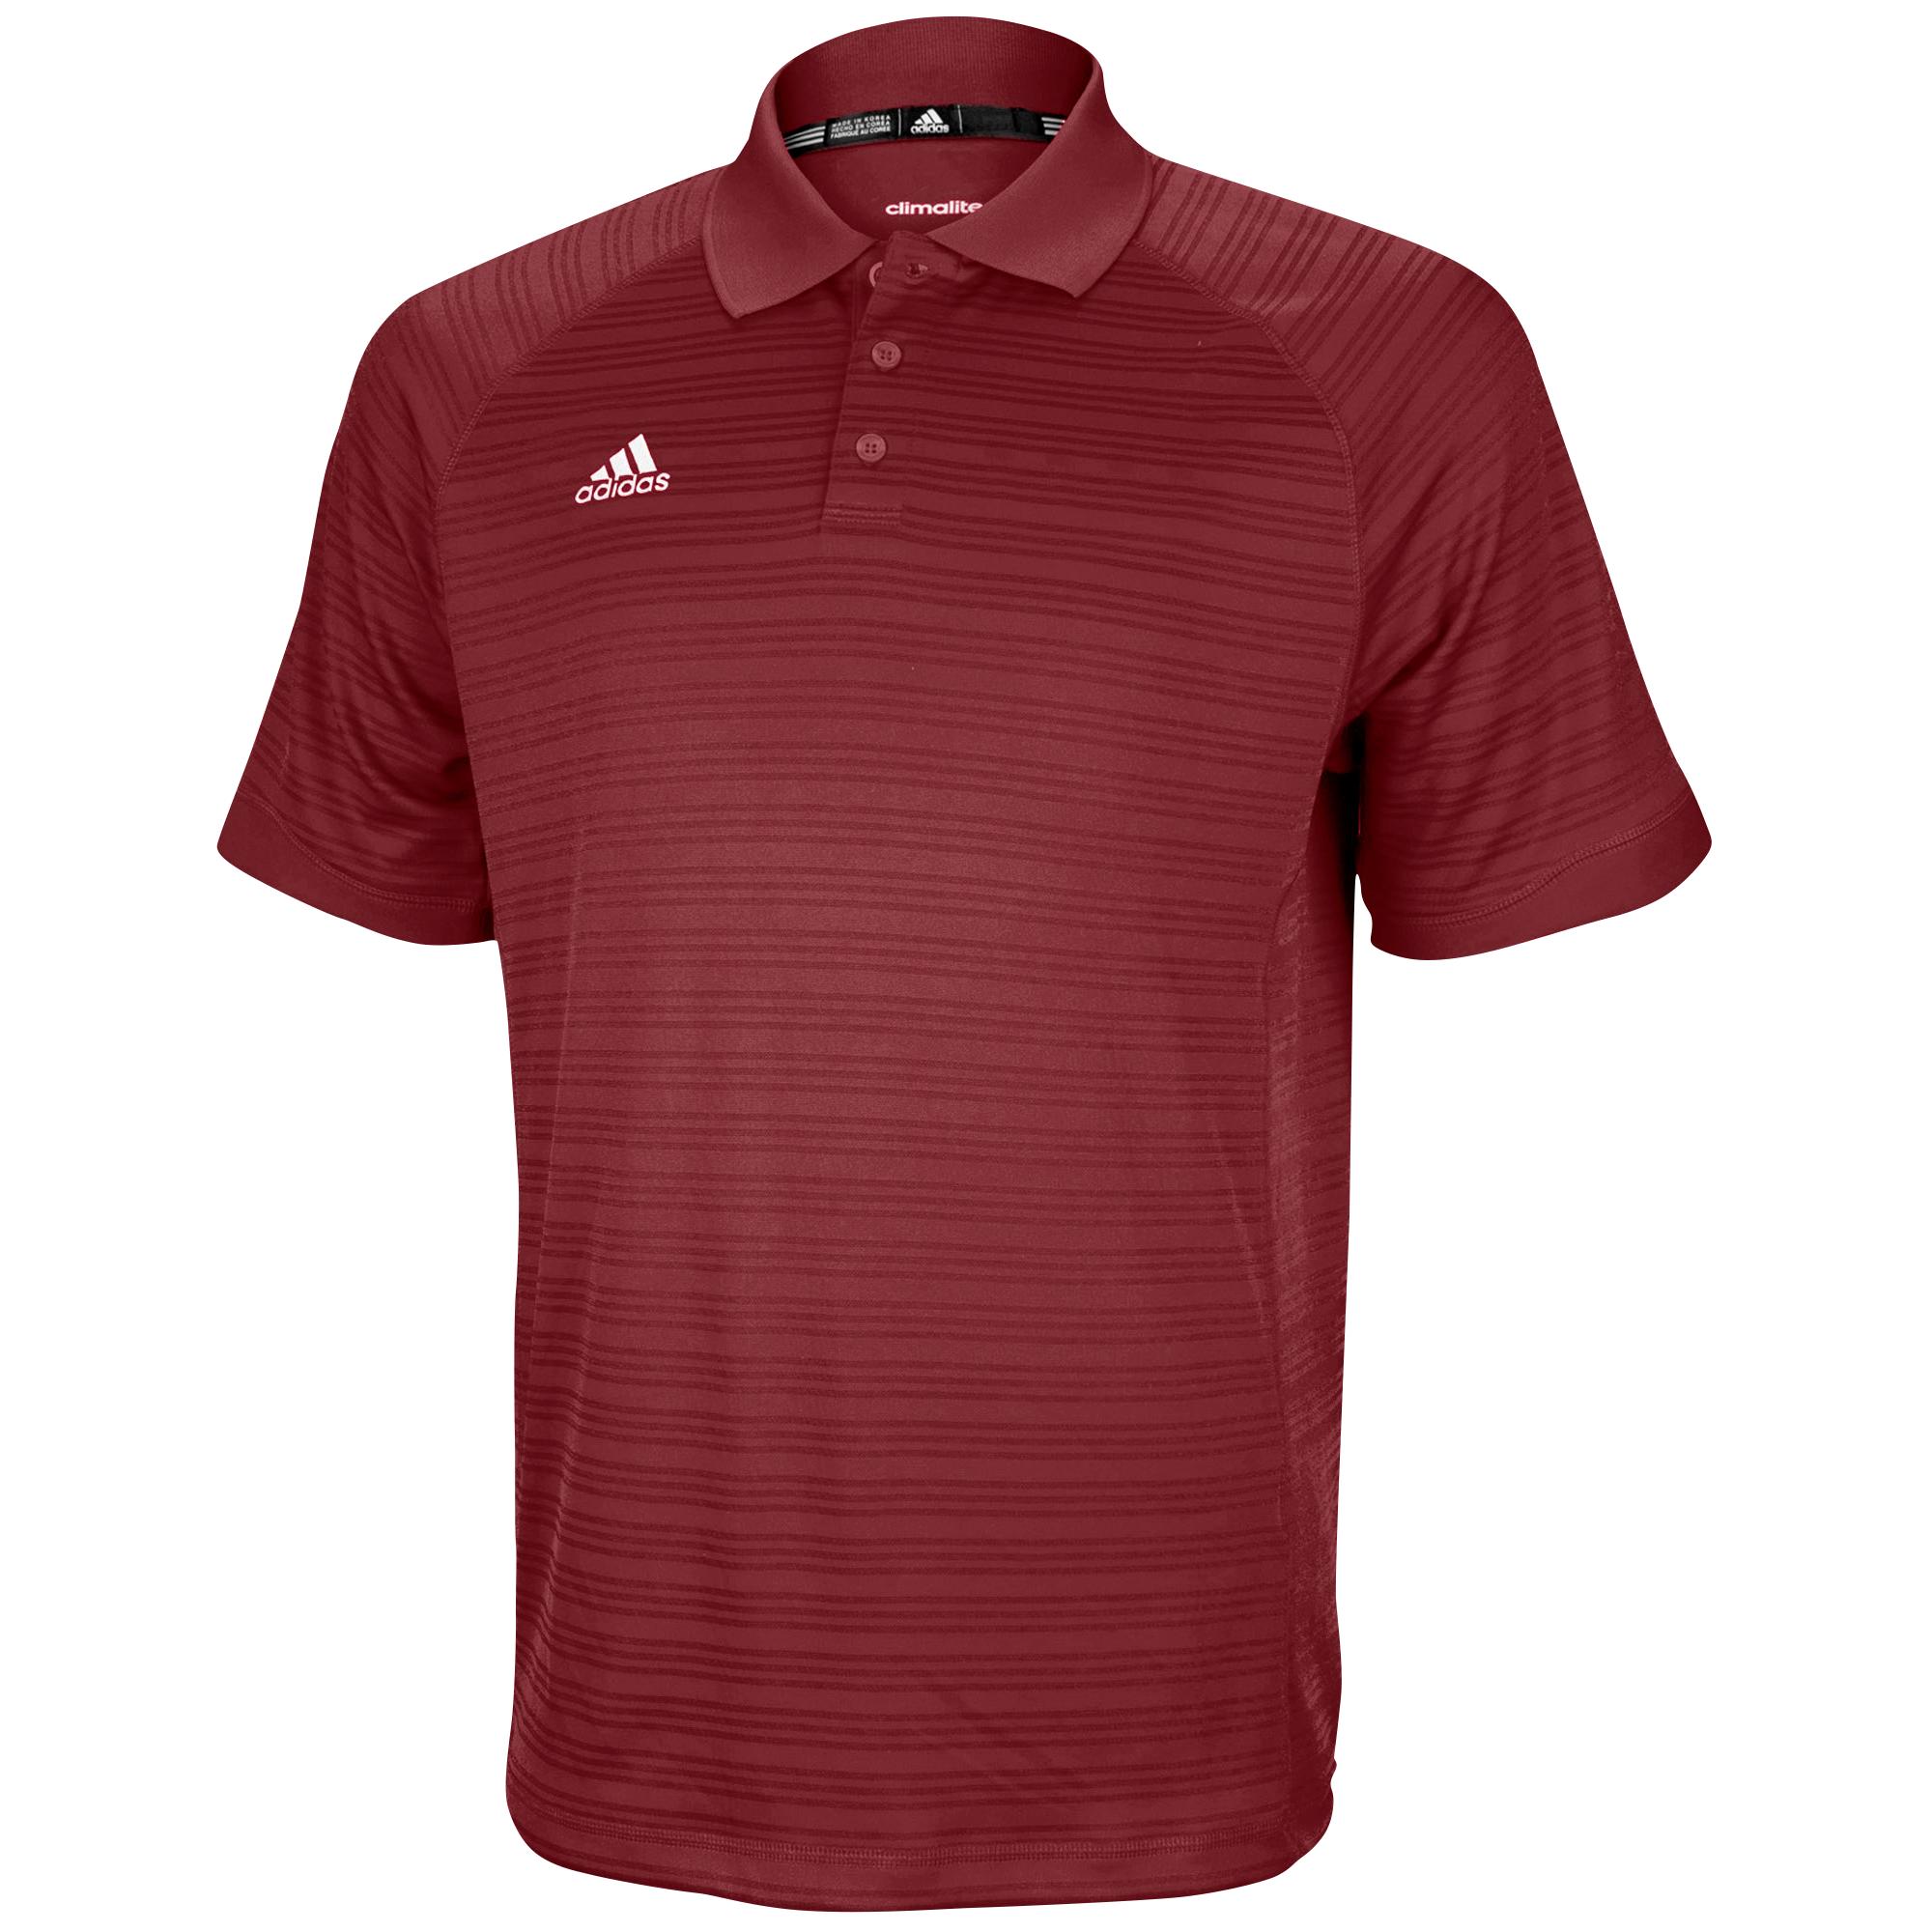 adidas Climalite Team Select Polo Shirt in Red for Men - Lyst